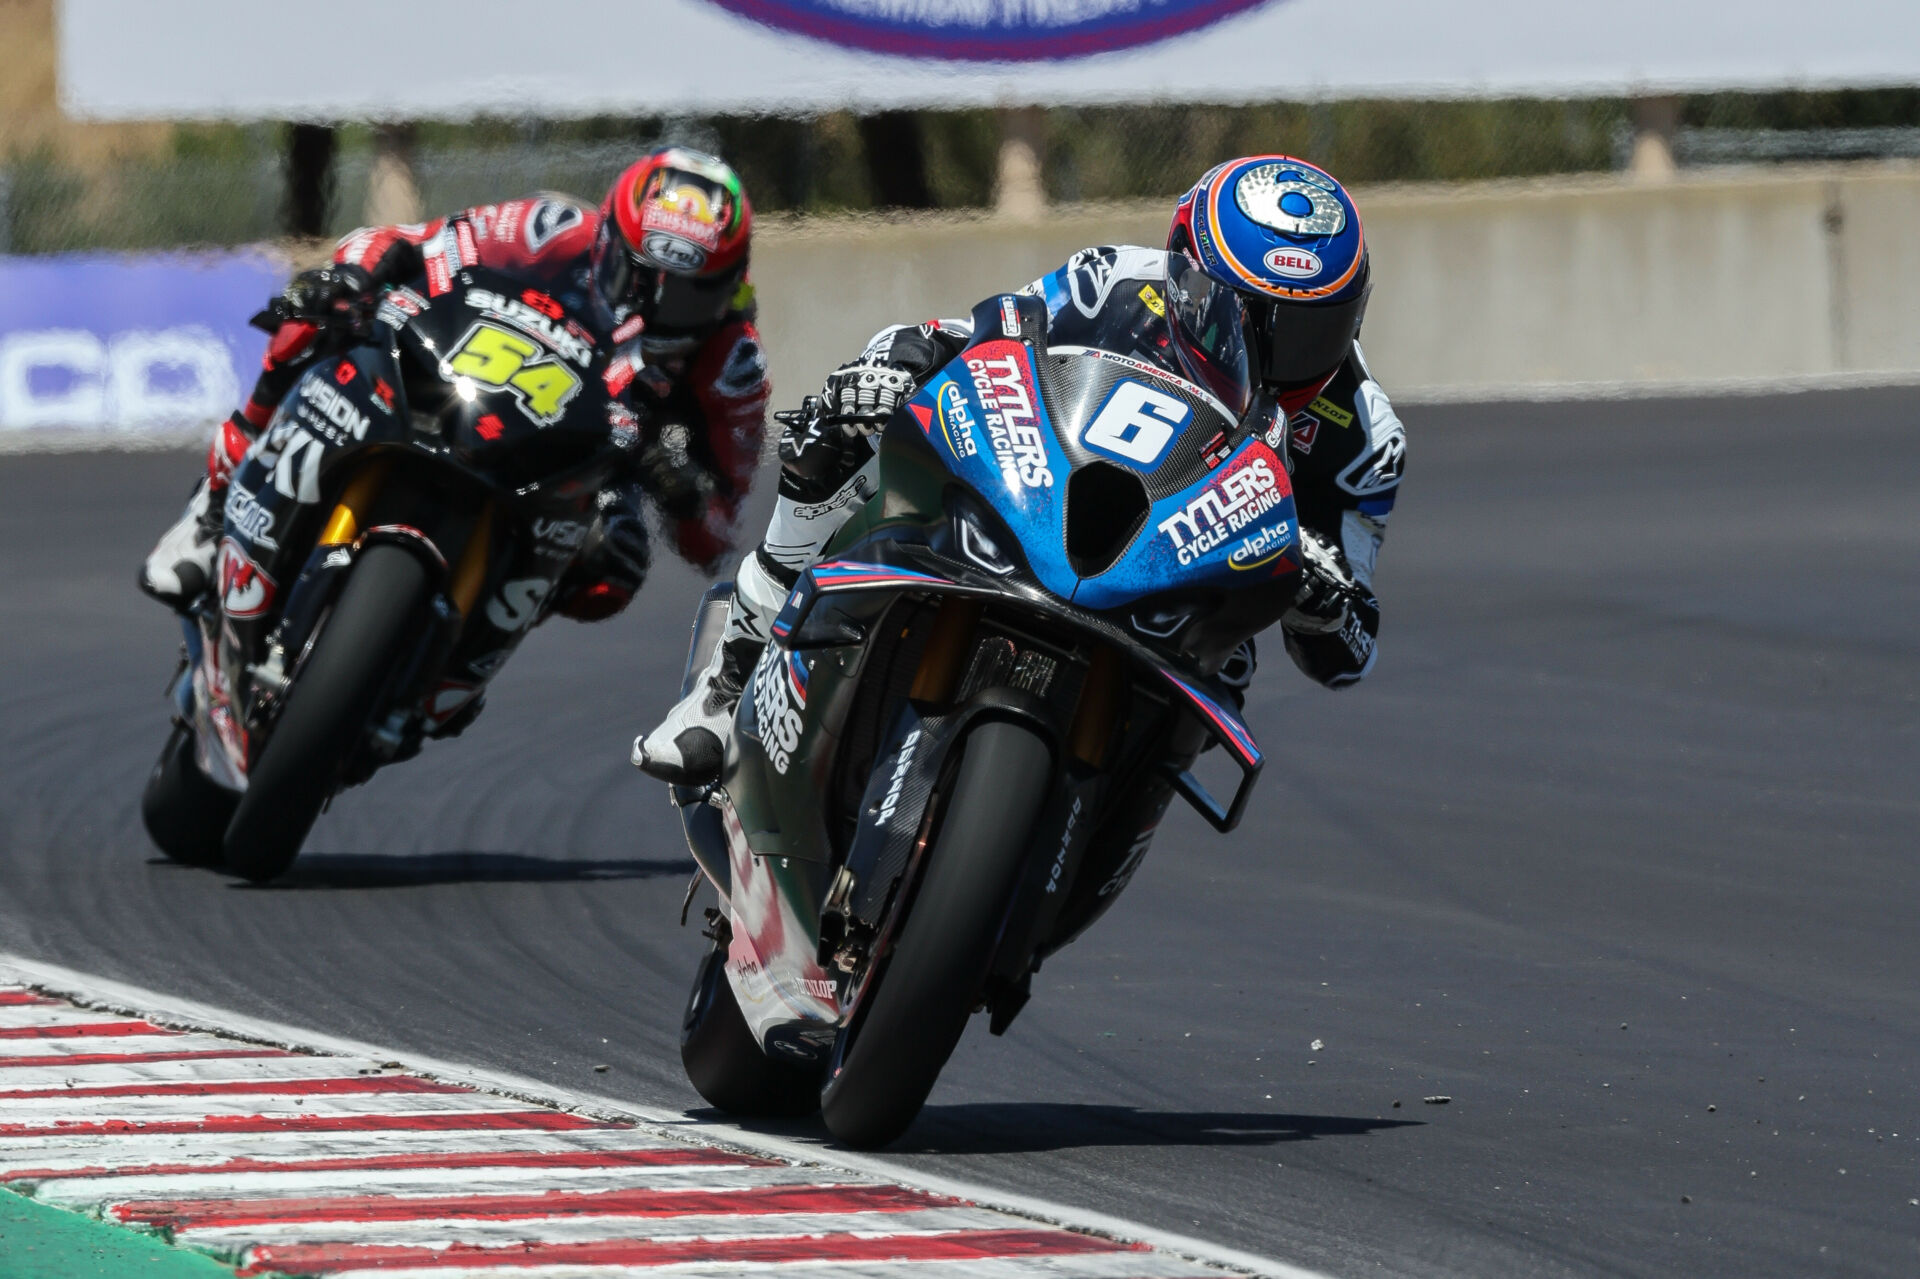 Cameron Beaubier (6) and Richie Escalante (54) were first and third, respectively, in MotoAmerica Superbike Q1 at Laguna Seca. Photo by Brian J. Nelson.